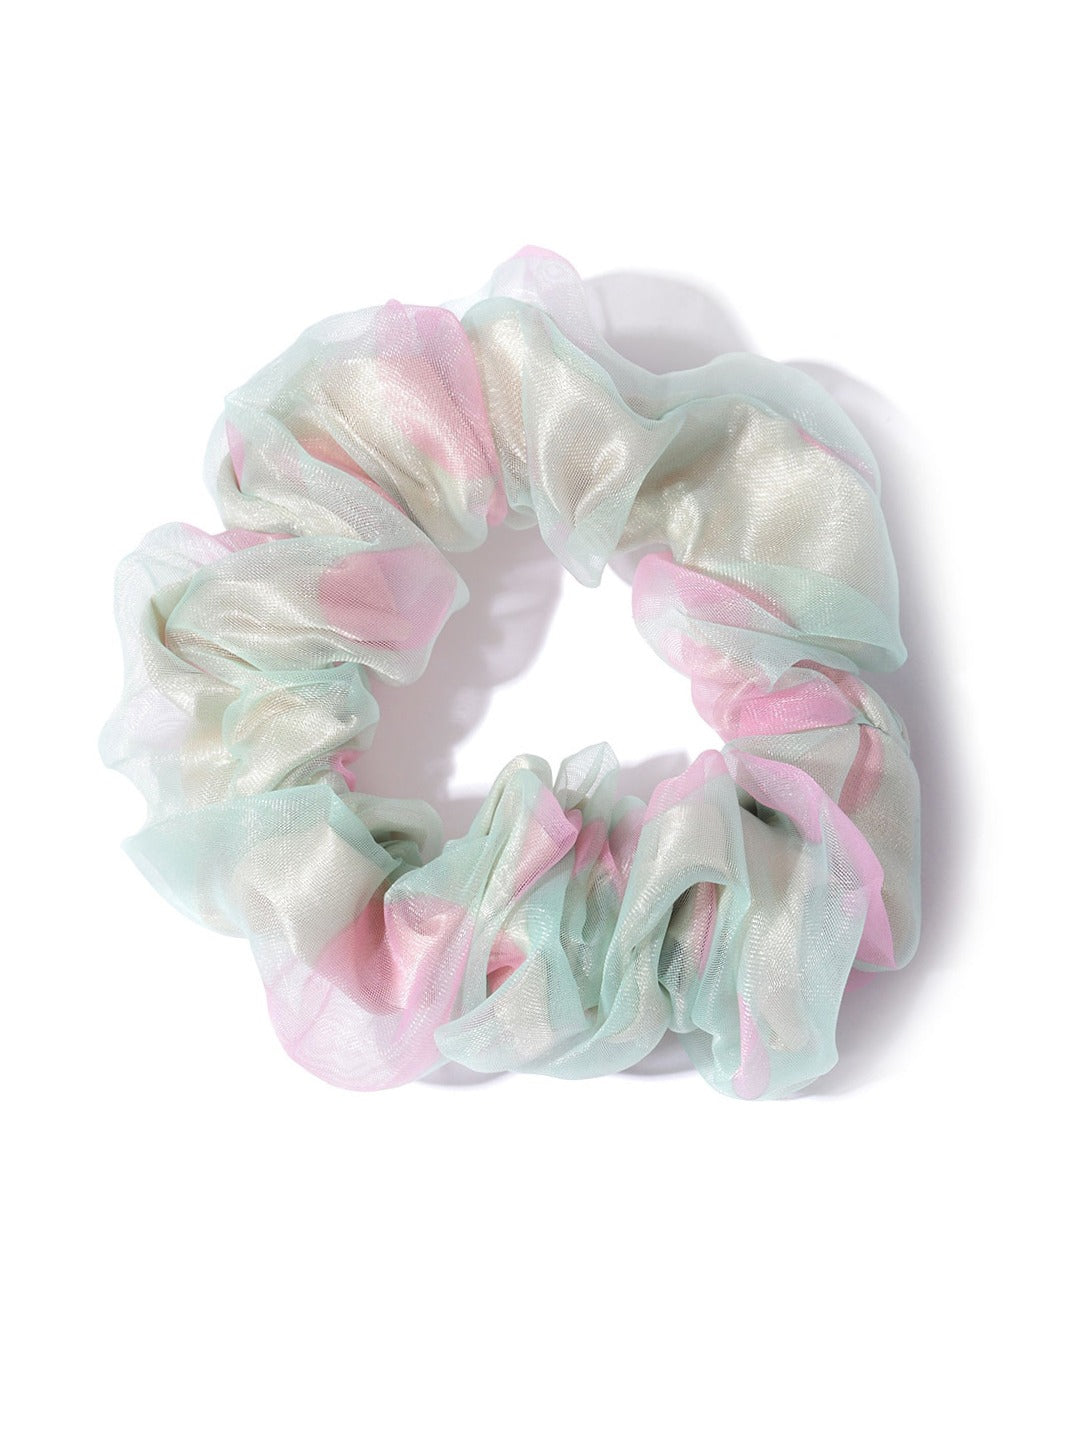 Blueberry KIDS set of 4 multi color scrunchies